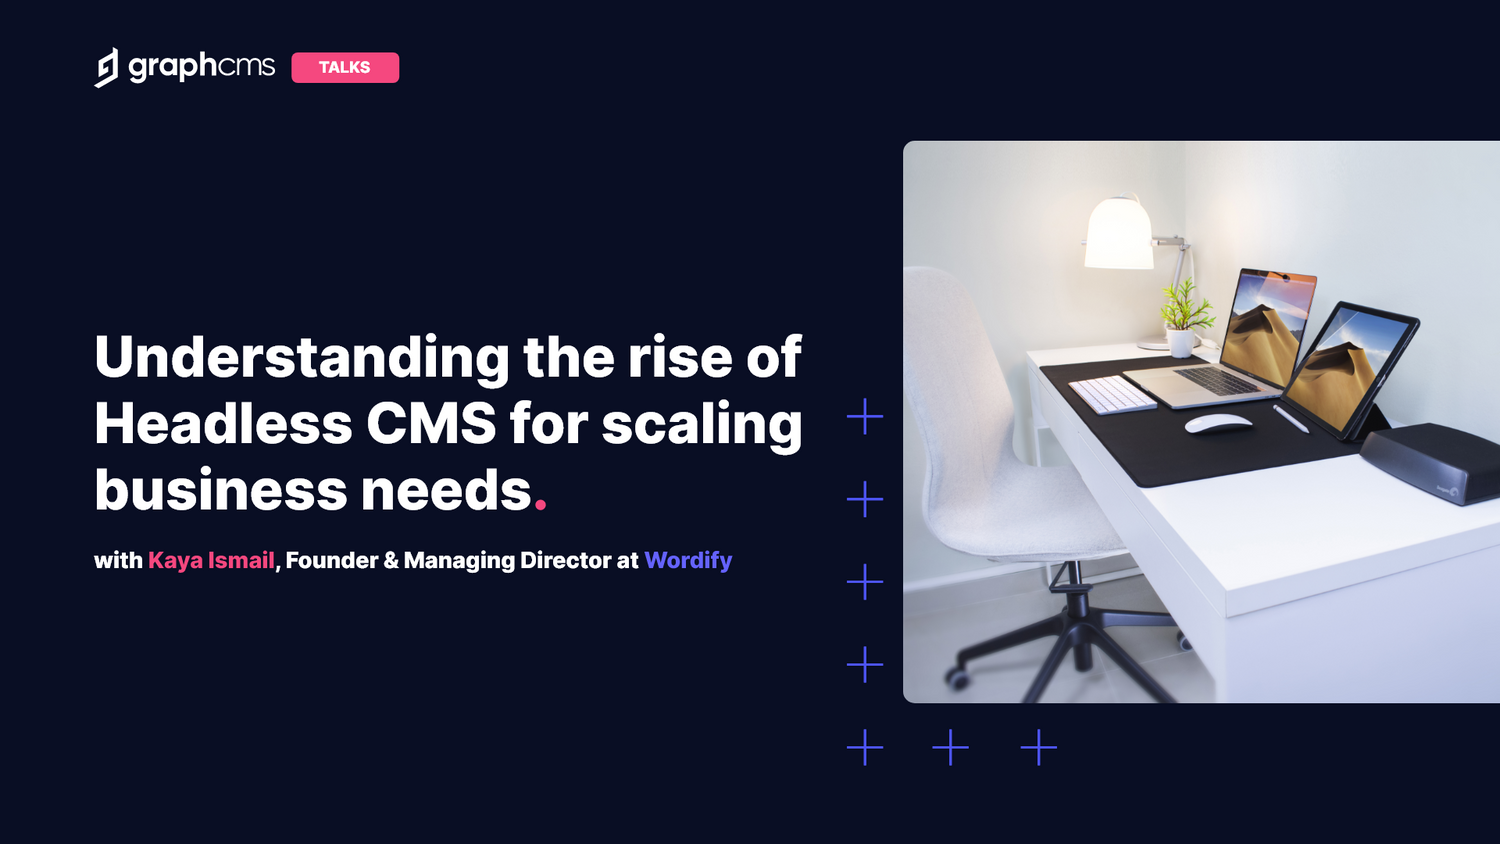 Understanding the rise of Headless CMS for scaling business needs